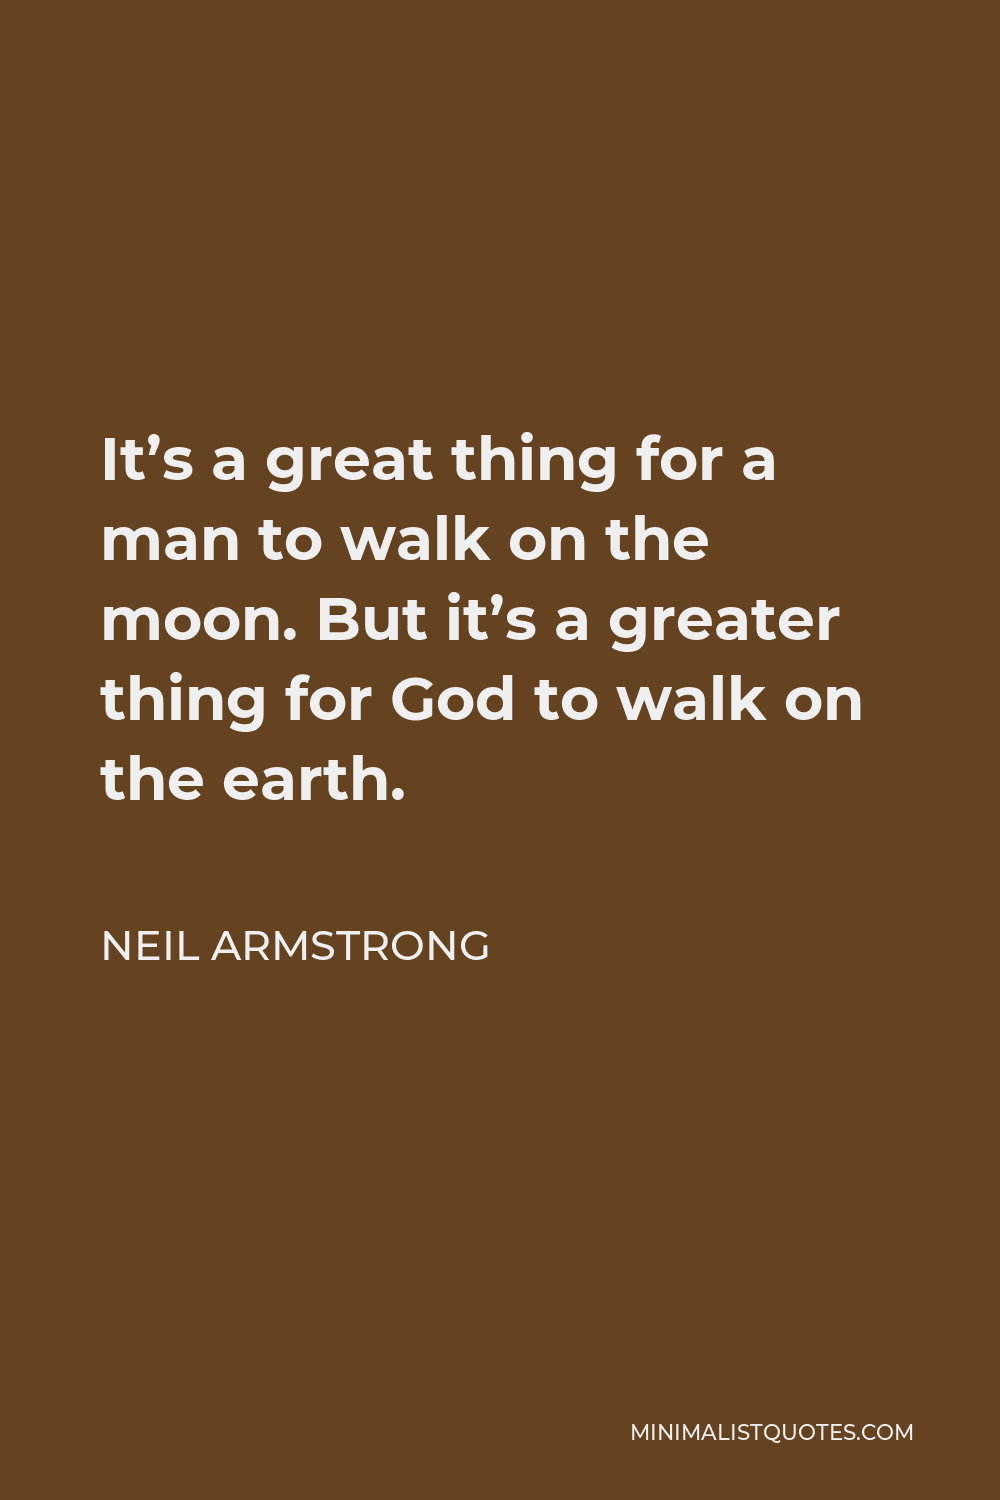 Neil Armstrong Quote - It’s a great thing for a man to walk on the moon. But it’s a greater thing for God to walk on the earth.